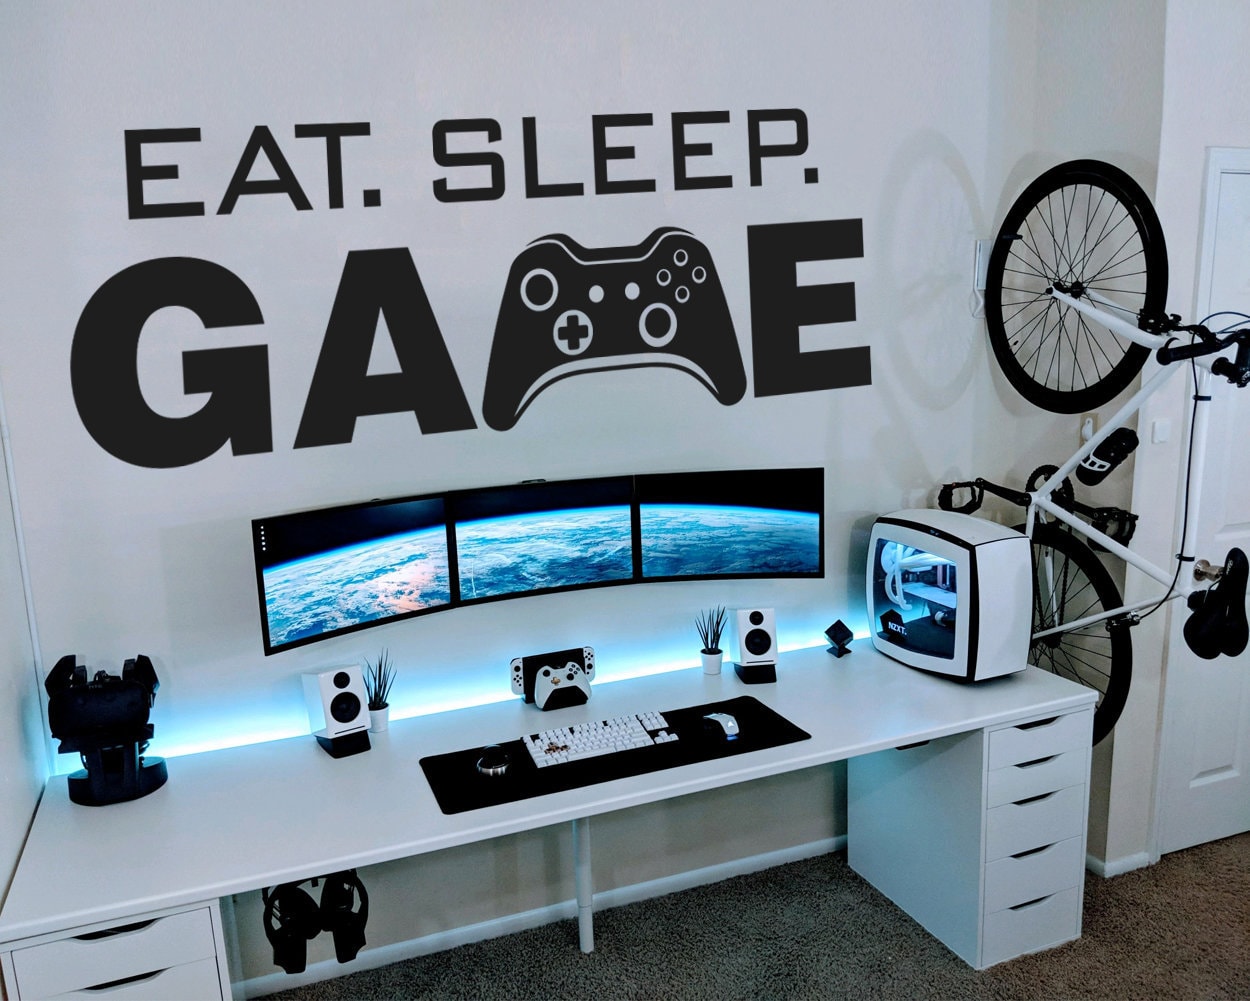 Eat Sleep Game Childrens Bedroom Wall Art Decal Vinyl Stickers Picture